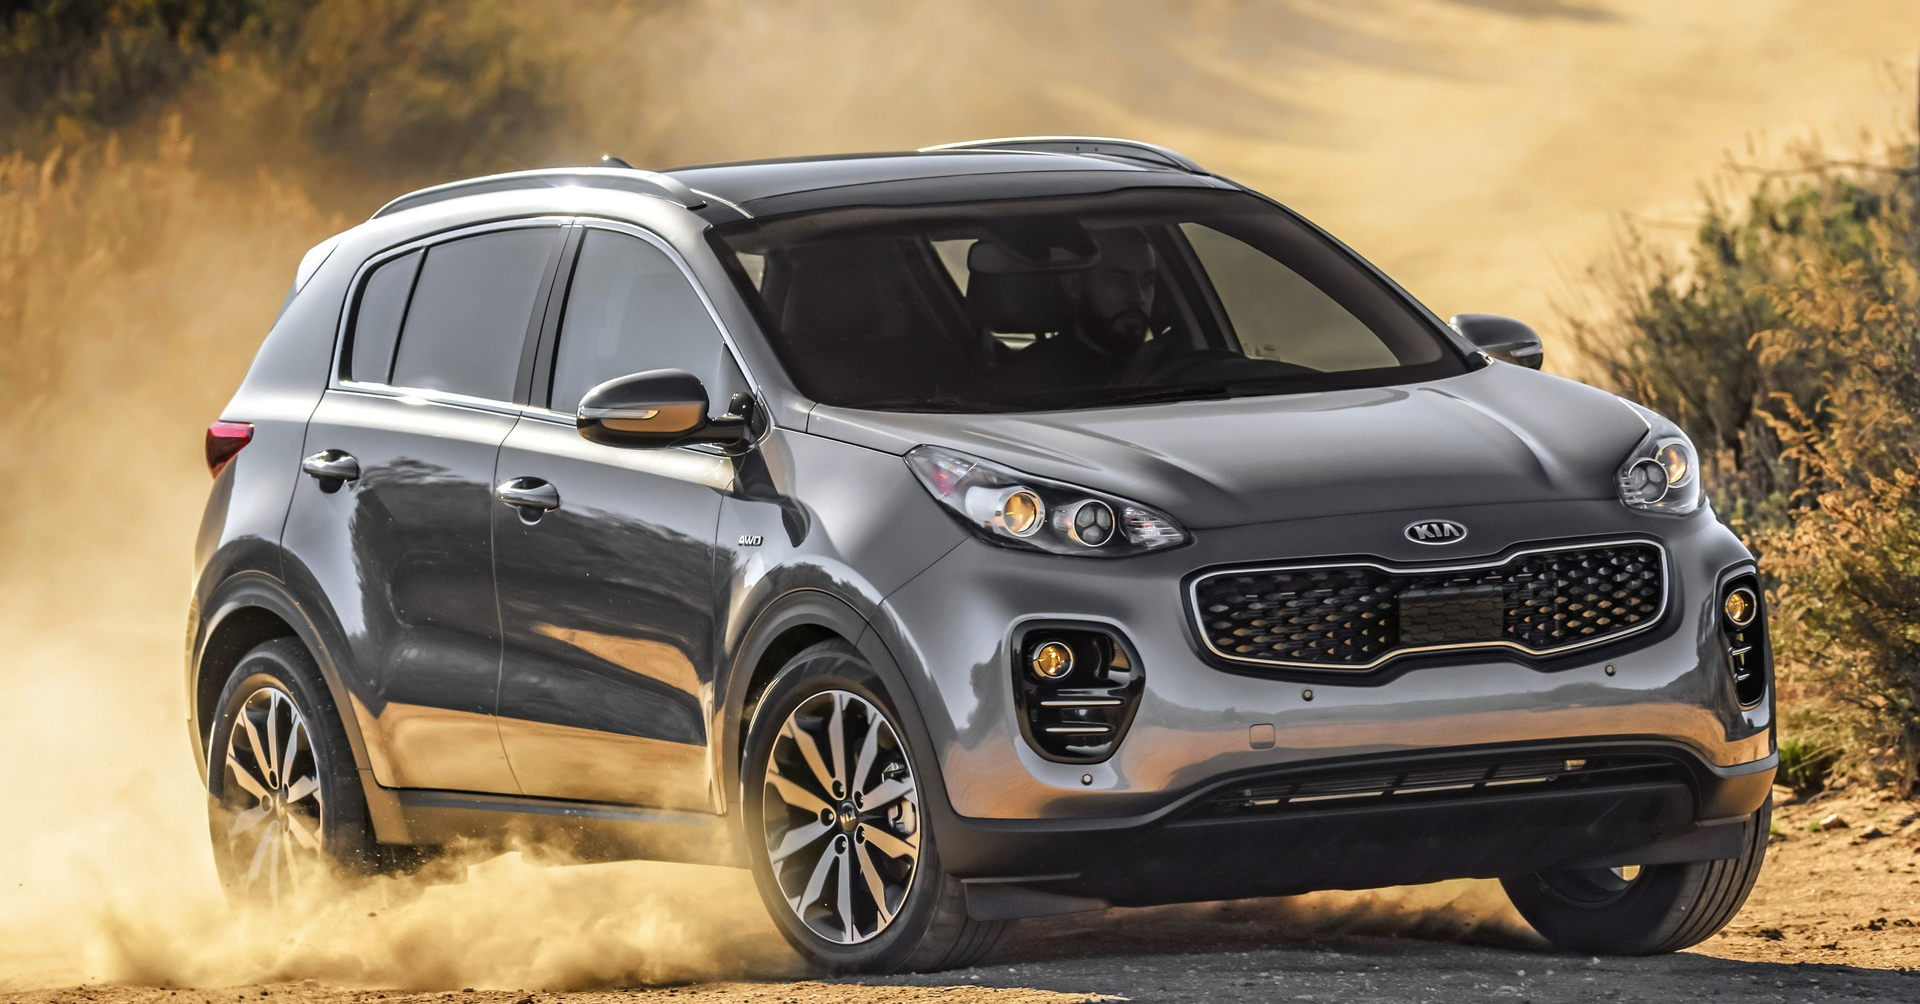 Get in and Let the Sportage Show You the Way